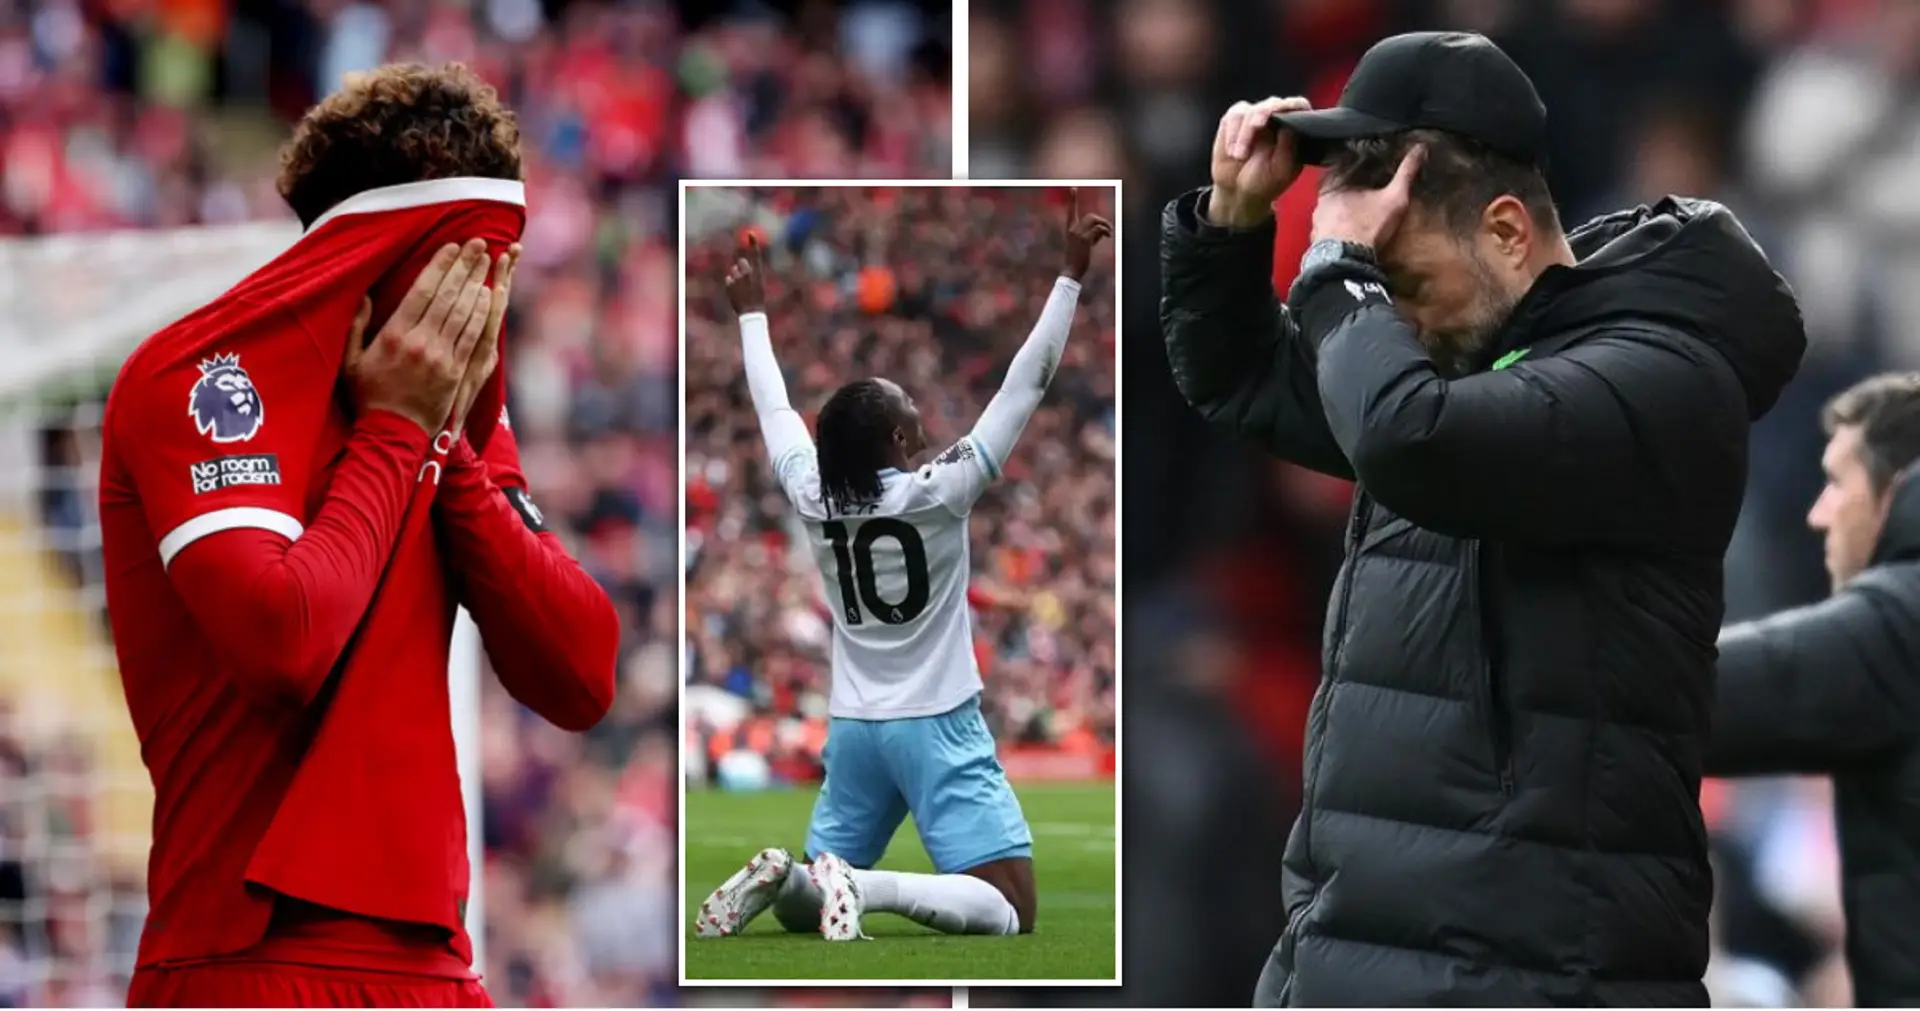 'My an*s is exhausted from clenching so hard': Crystal Palace fans react to ruining Liverpool's another title charge